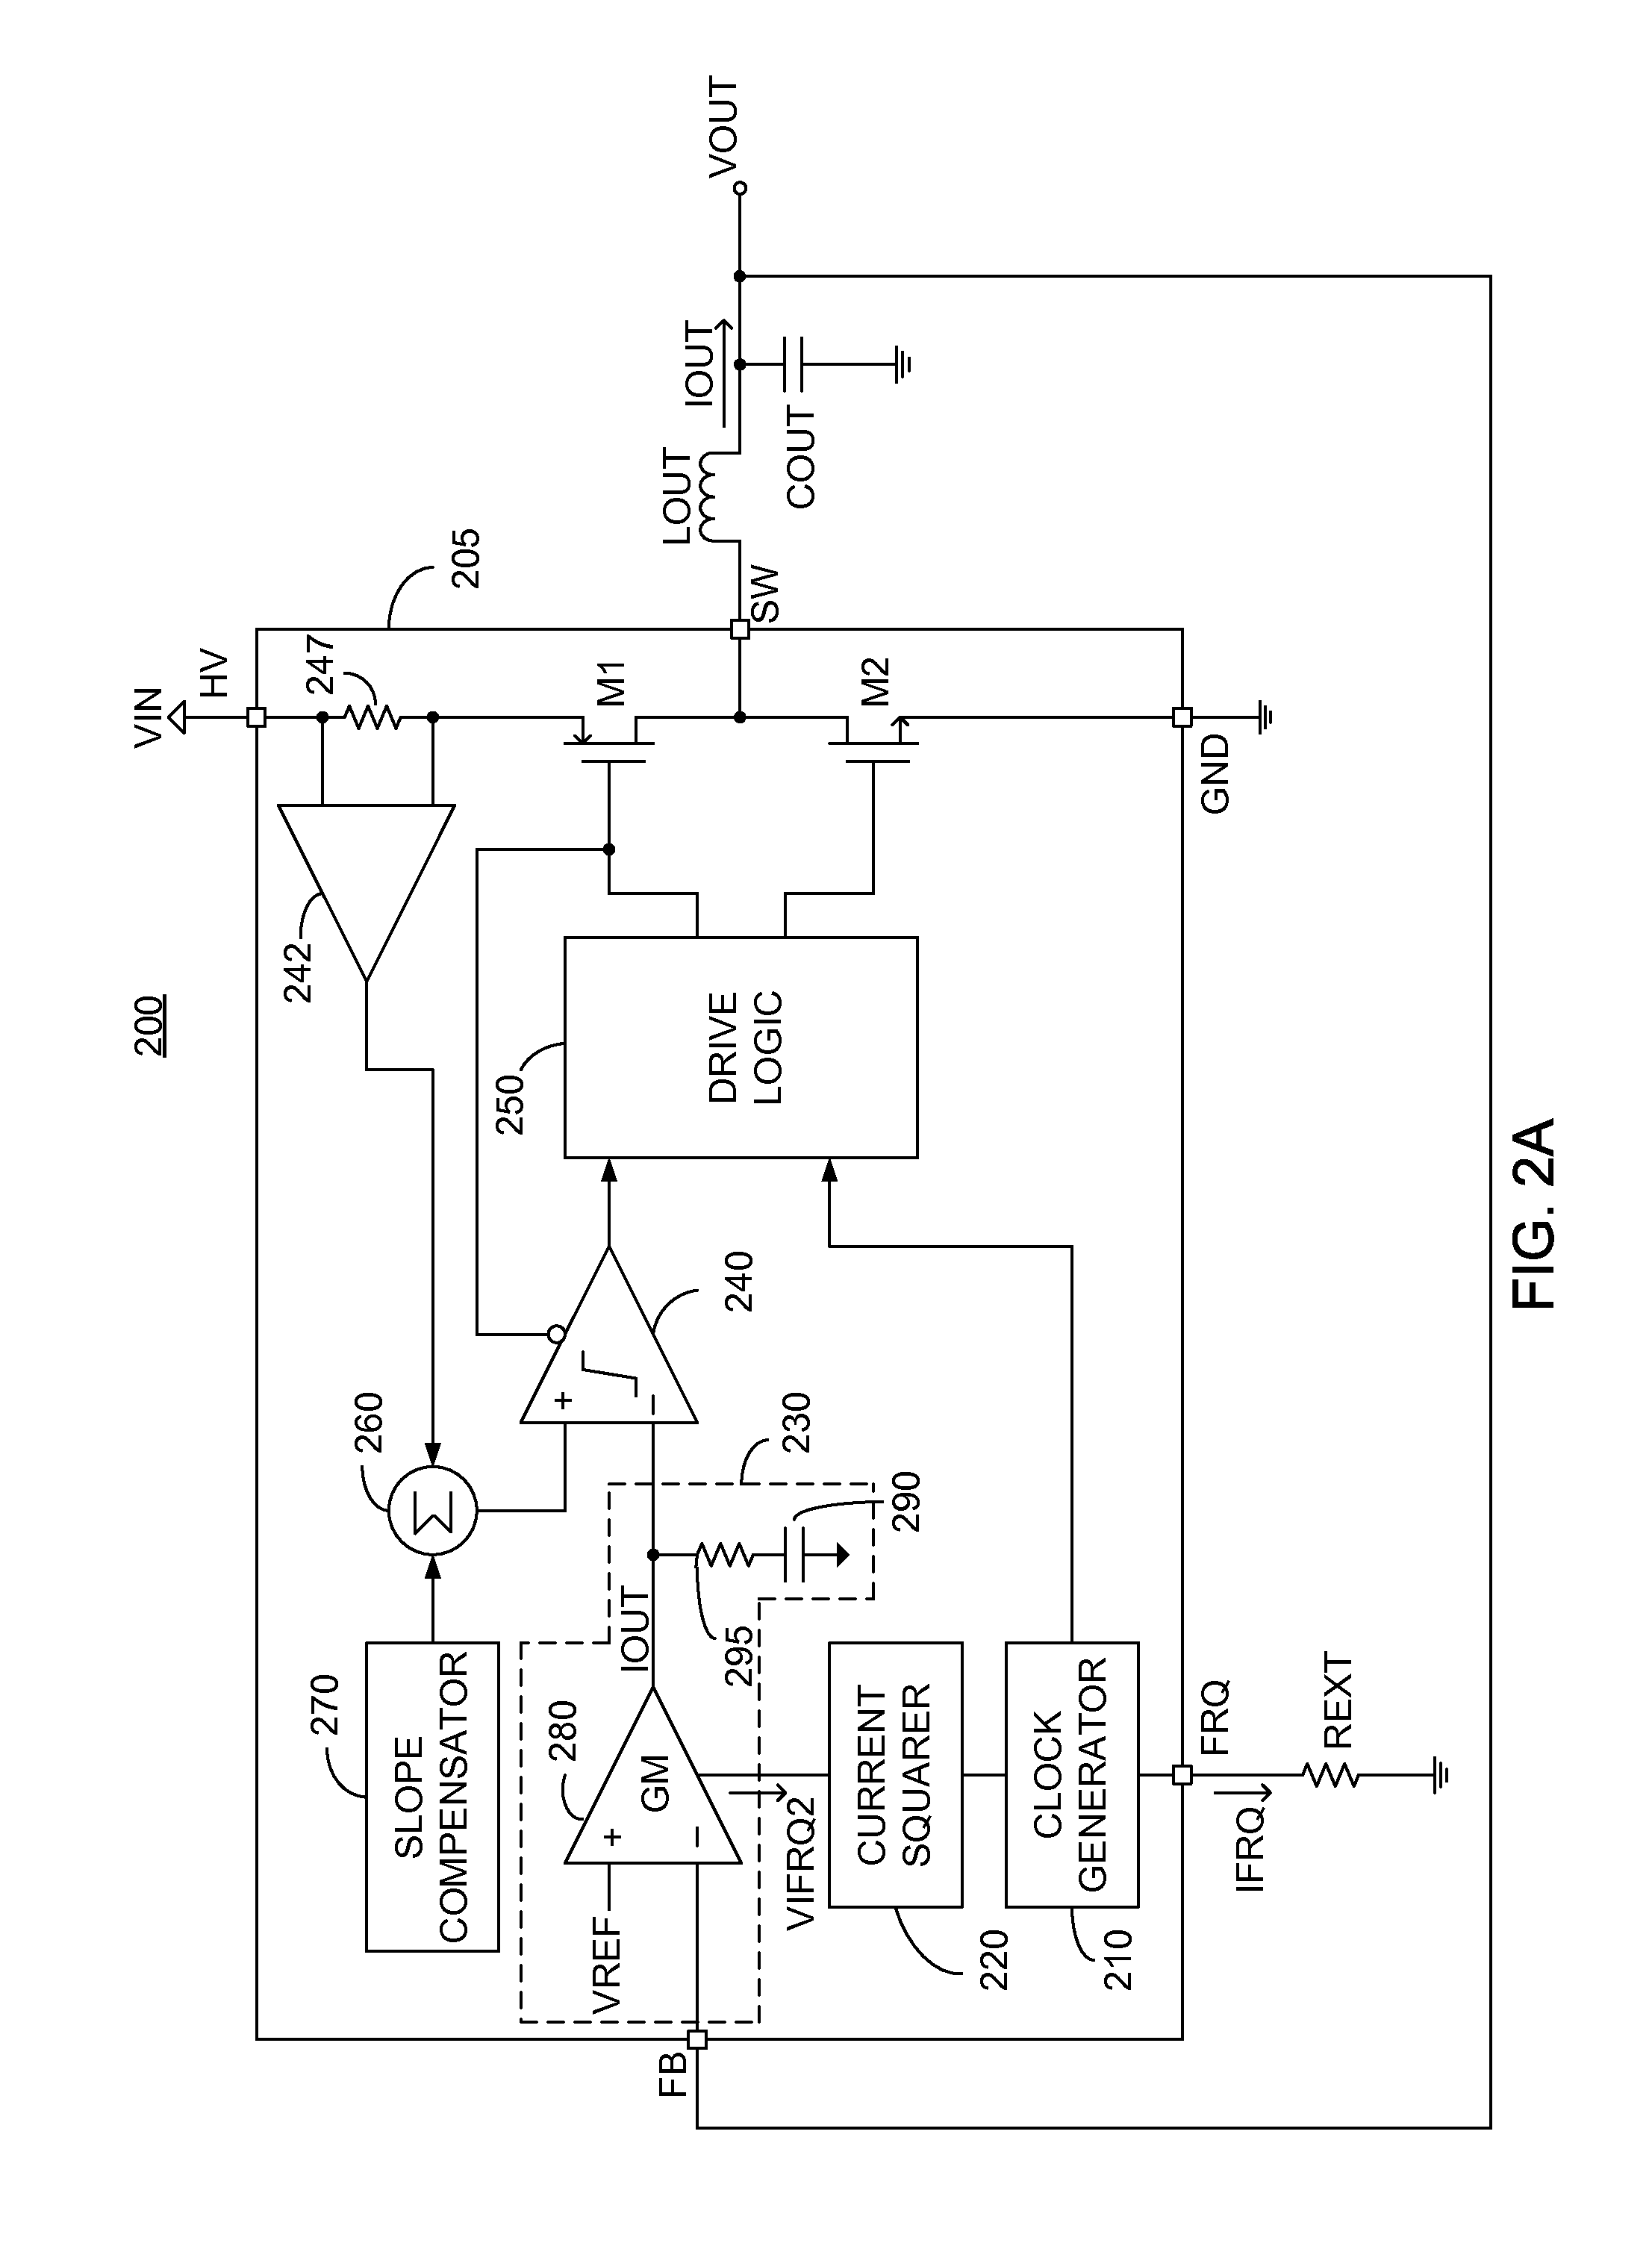 Converter with crossover frequency responsive to switching frequency